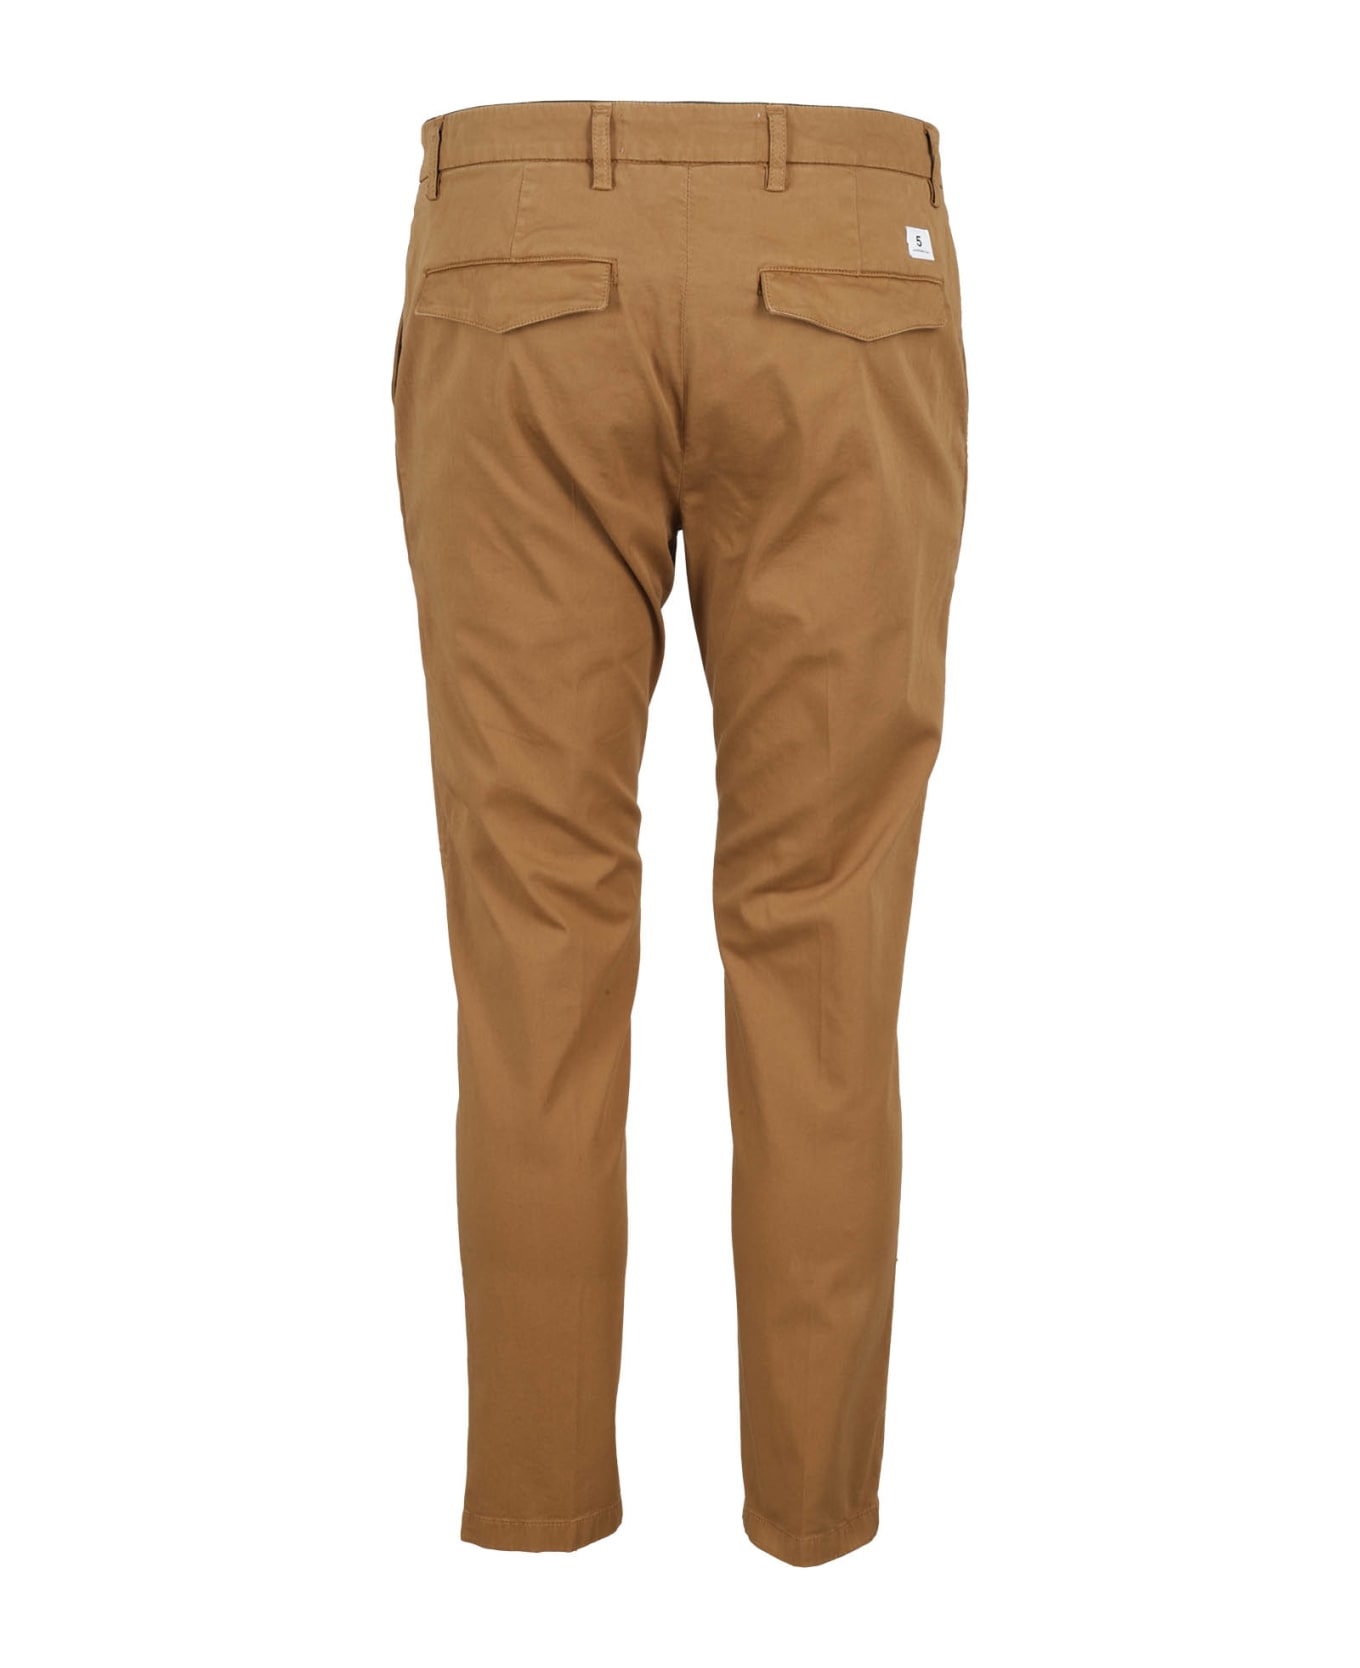 Department Five Prince Chinos - Tabacco